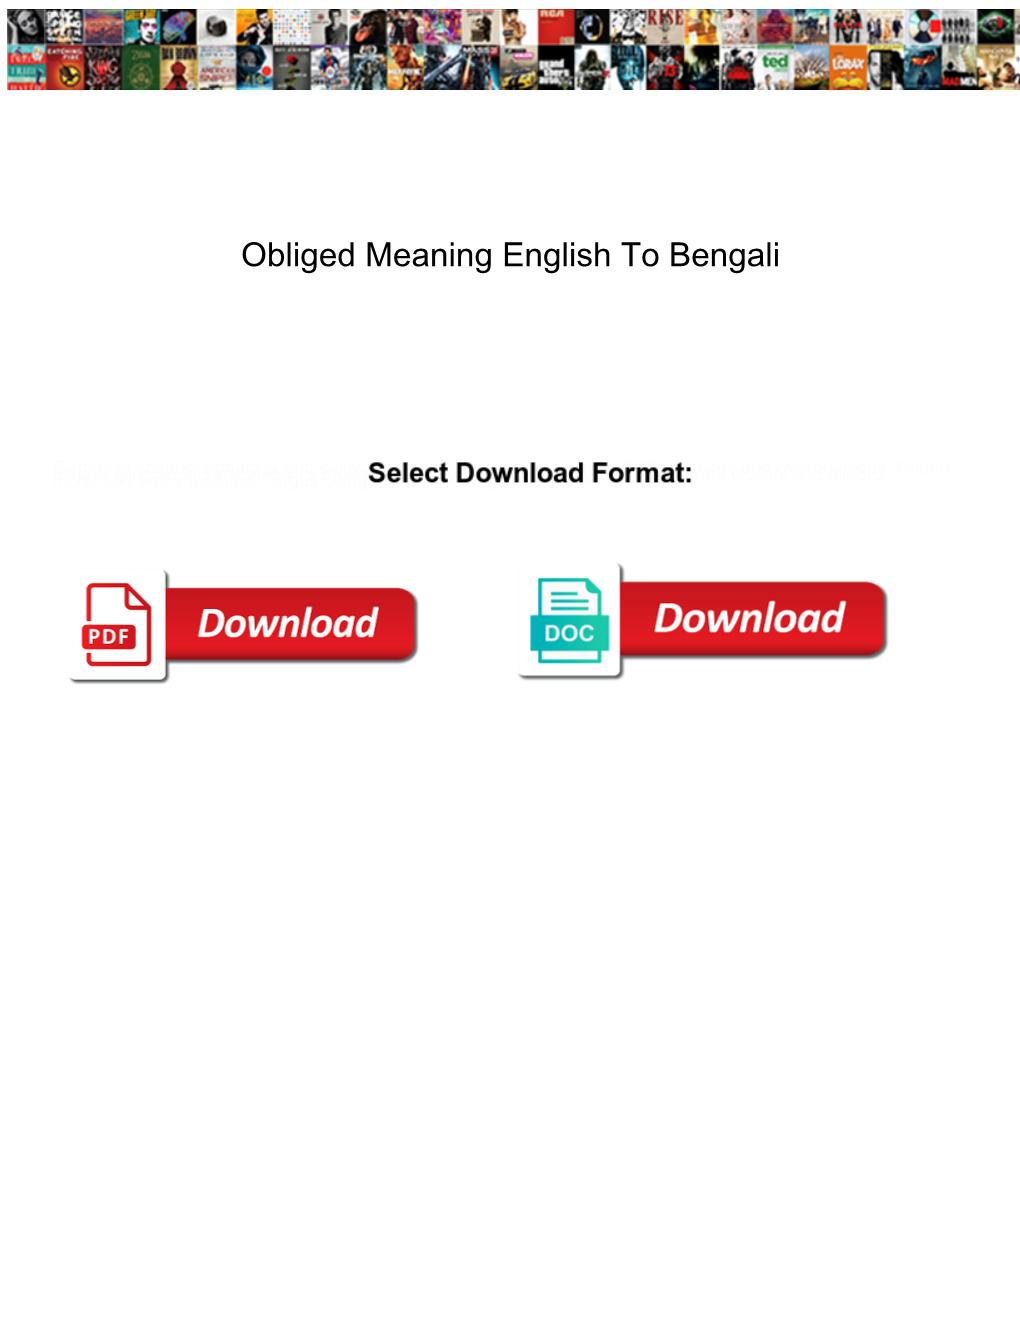 Obliged Meaning English to Bengali